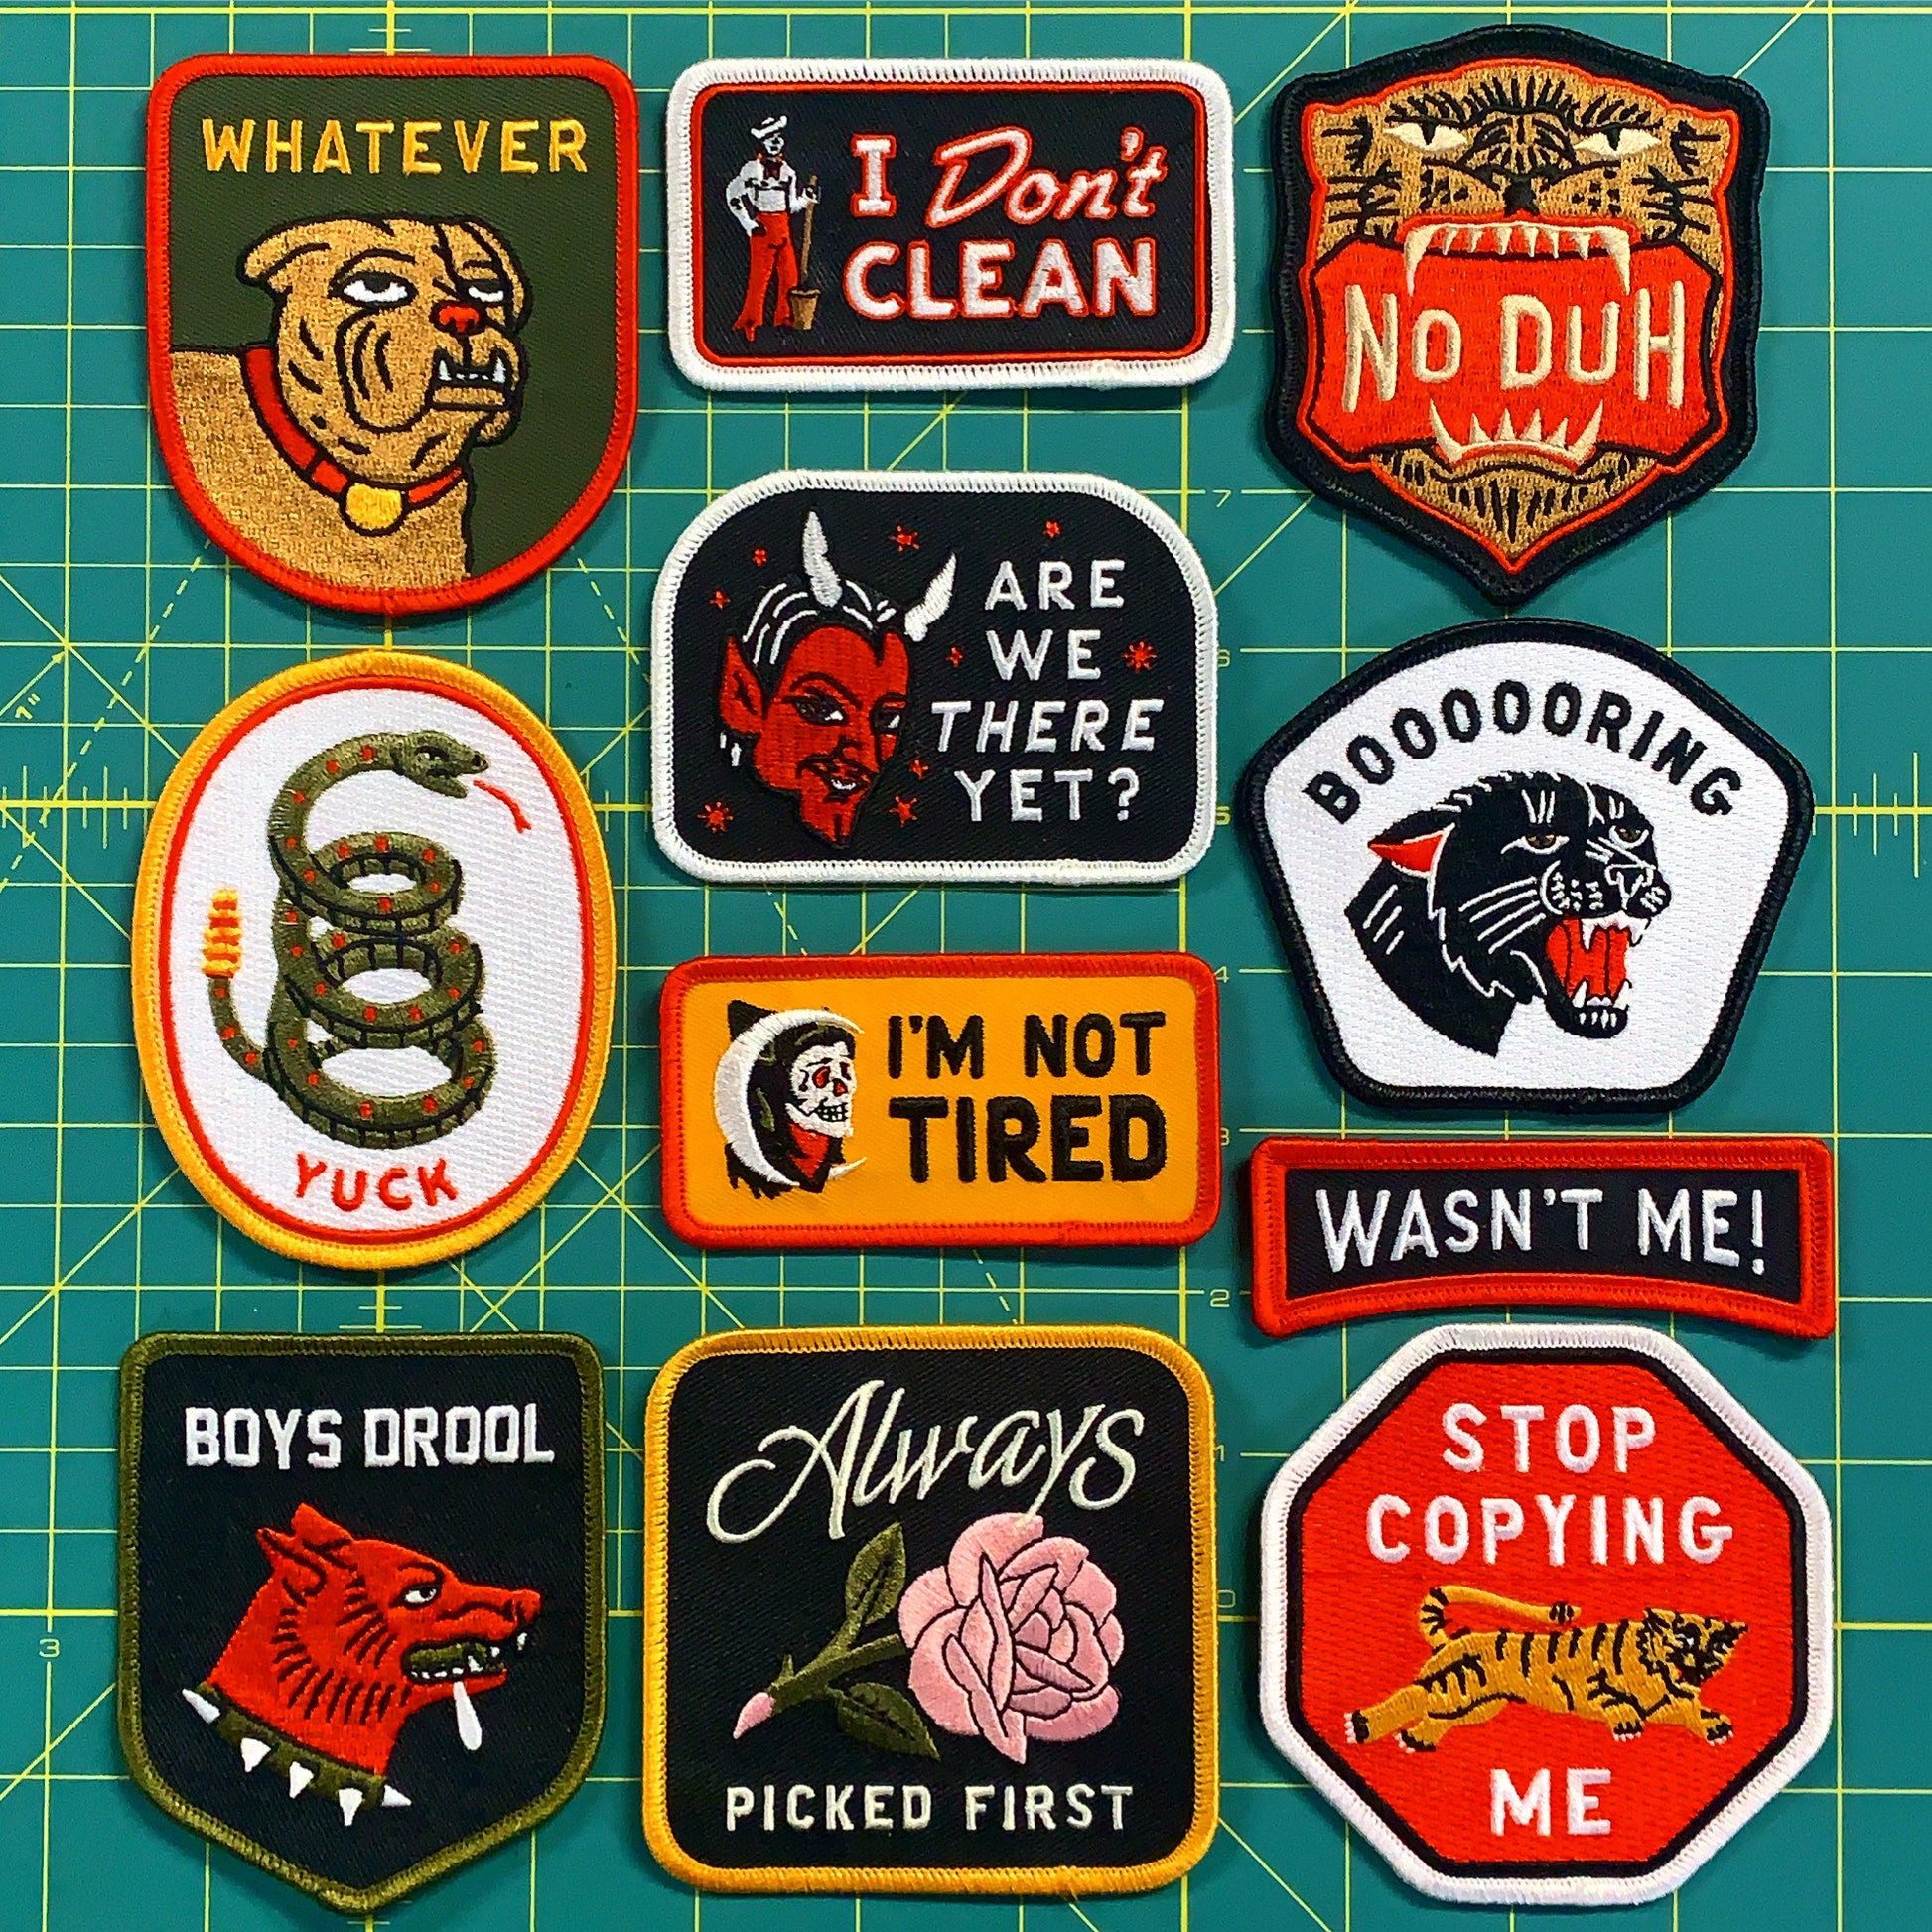 Introverted Dont Talk to Me Iron-on Patch Saying Patches, Funny Jacket Iron-on  Patches, Funny Anti-social Backpack 